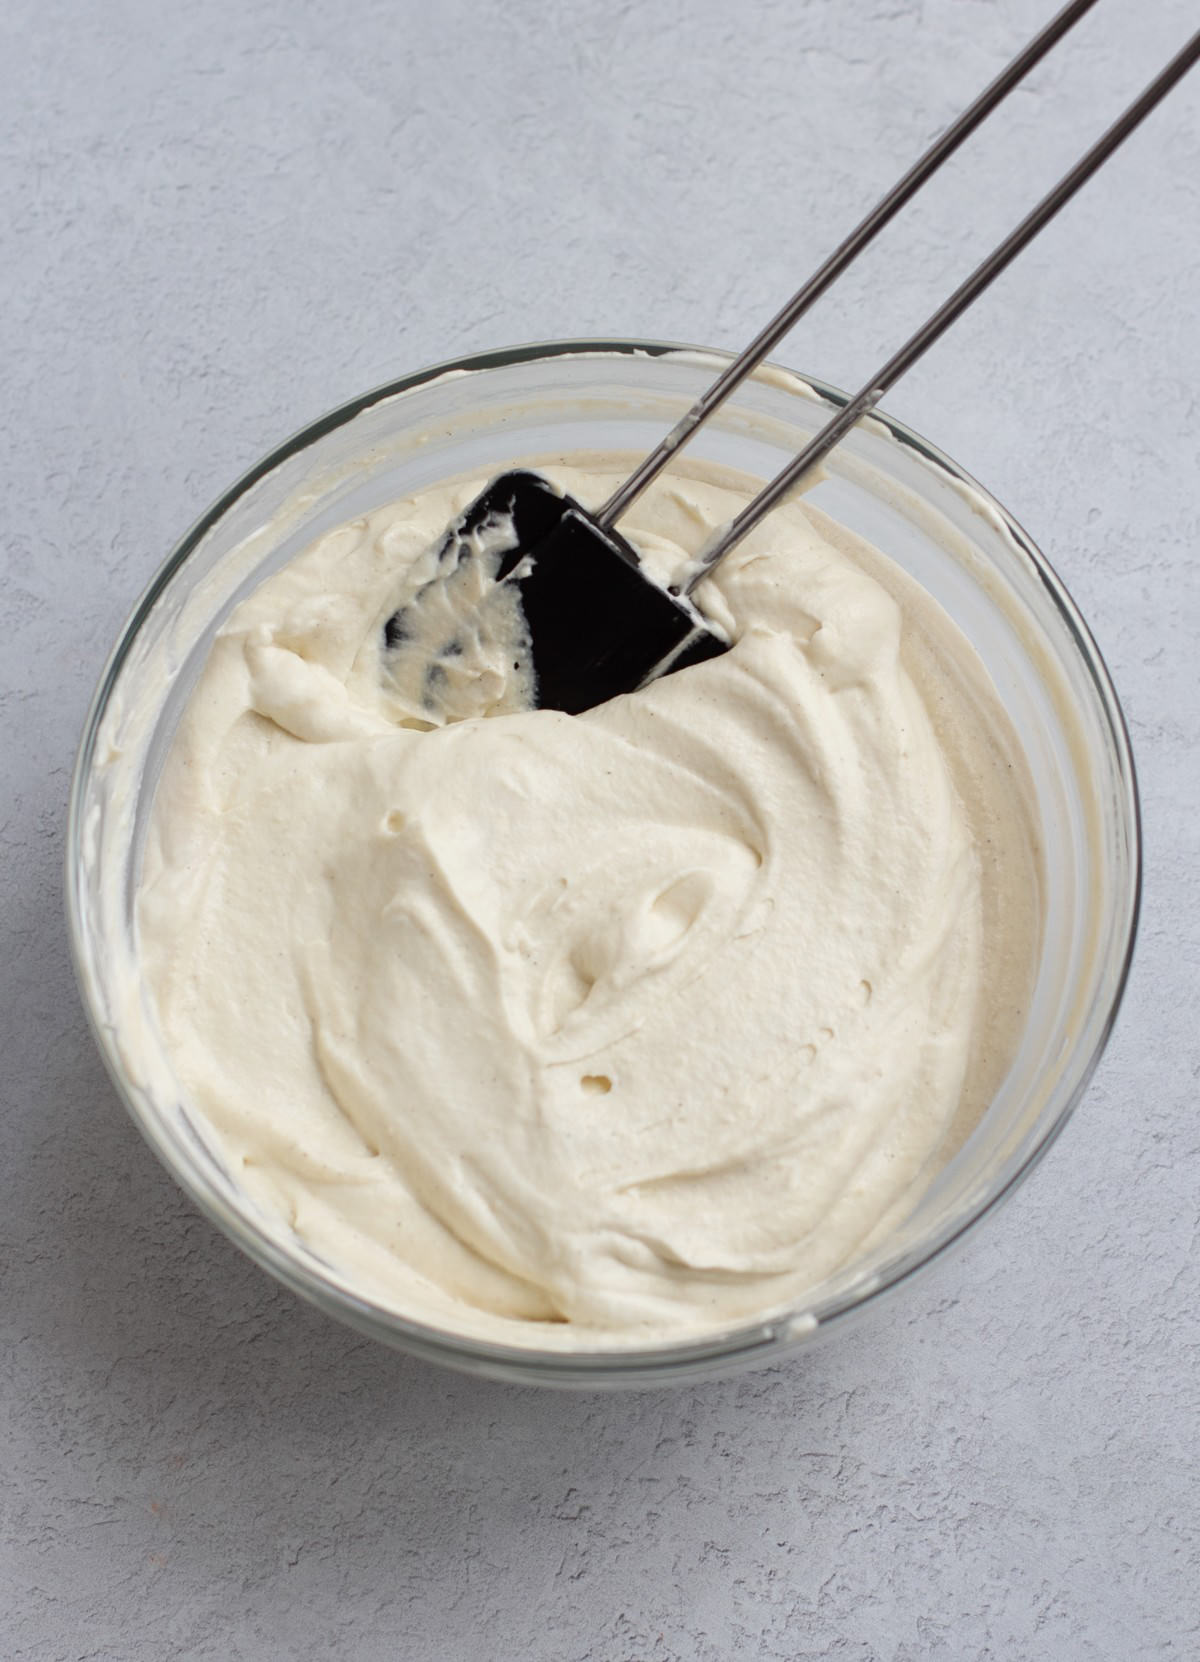 coconut whipped cream and cashew cream combined in bowl